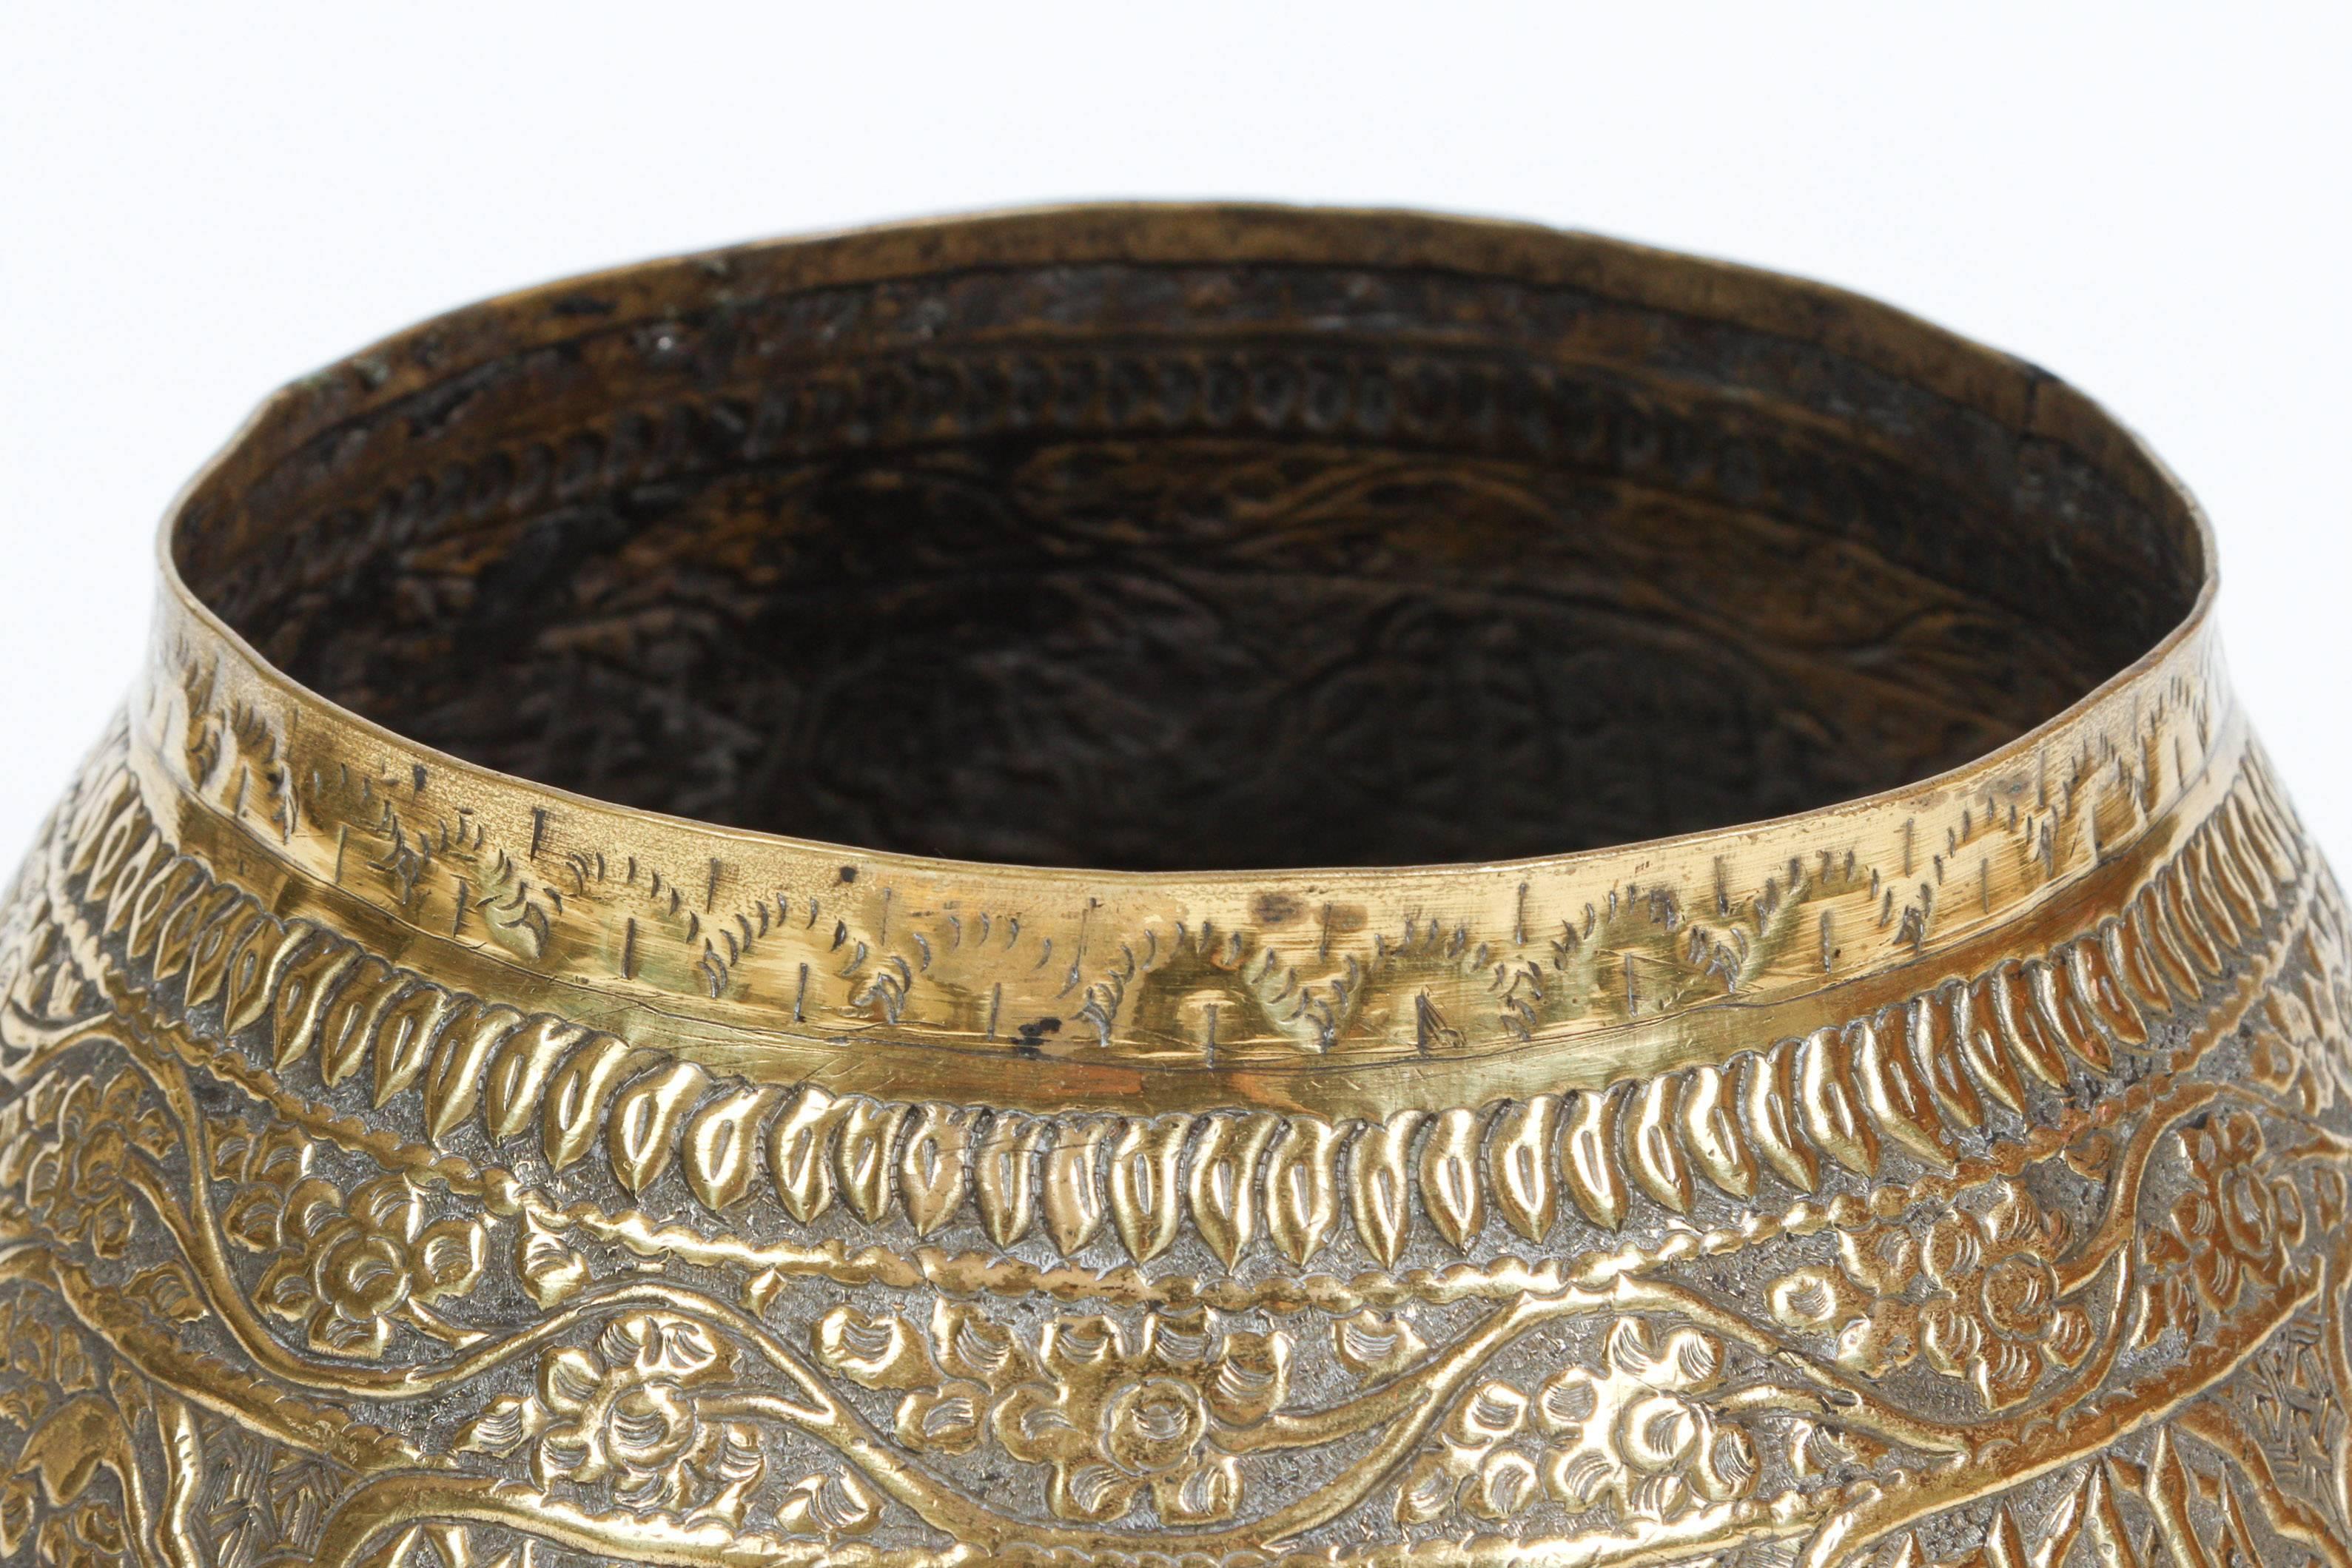 Large antique 19th century or before brass Middle Eastern Persian Islamic style footed bowl finely and heavily hand-etched and embossed with brass repousse and decorated with calligraphic decoration inscriptions medallions.
A large Mamluk style